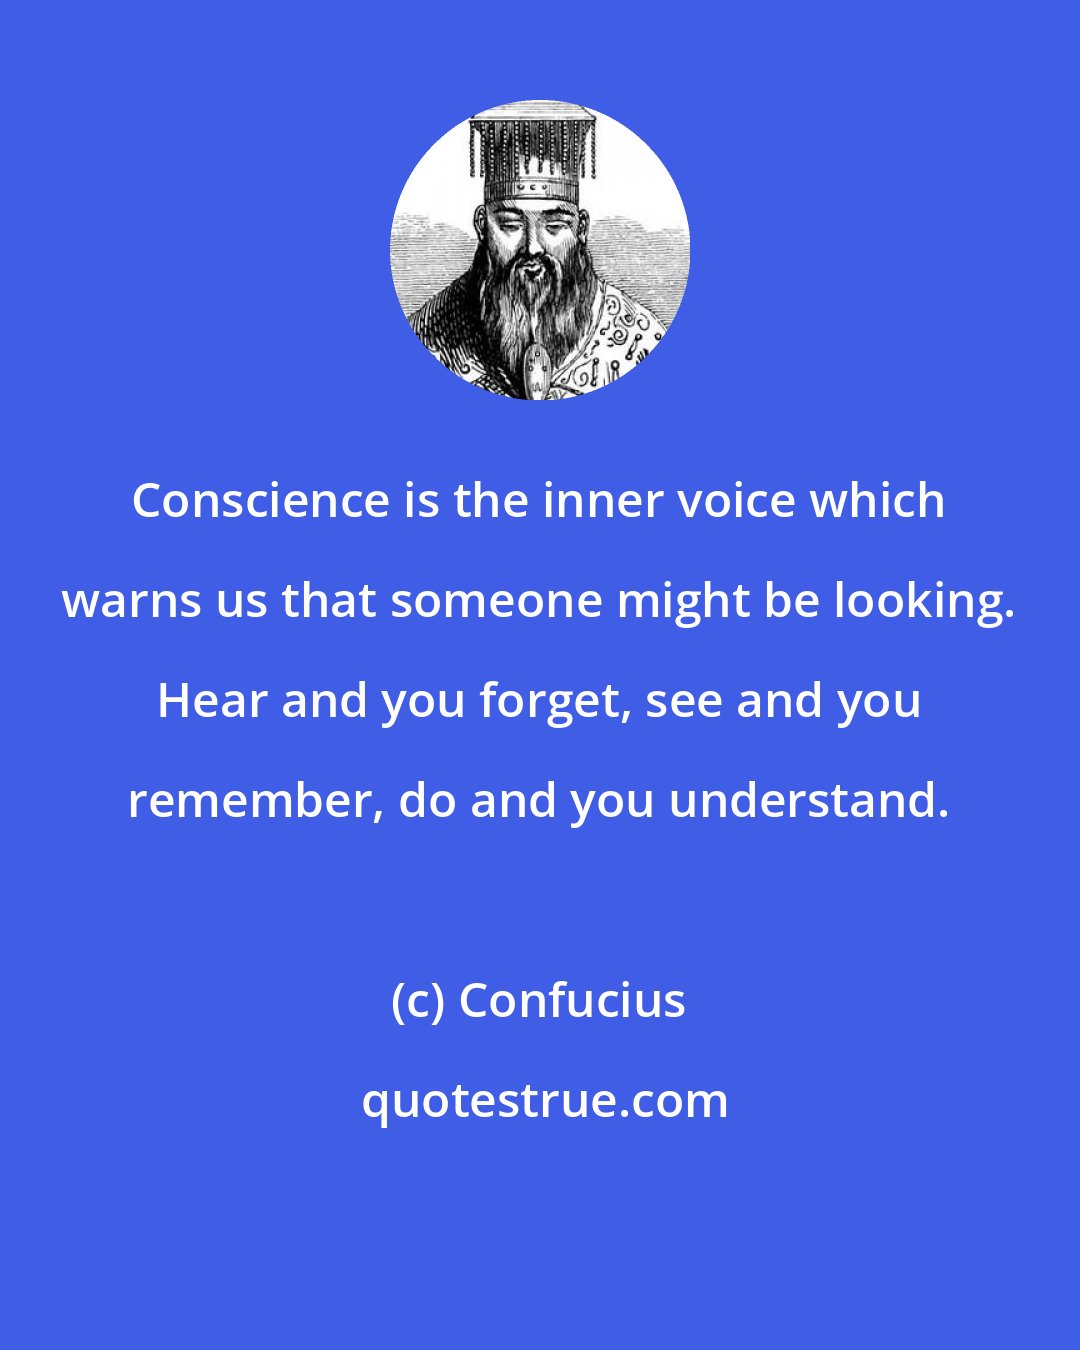 Confucius: Conscience is the inner voice which warns us that someone might be looking. Hear and you forget, see and you remember, do and you understand.